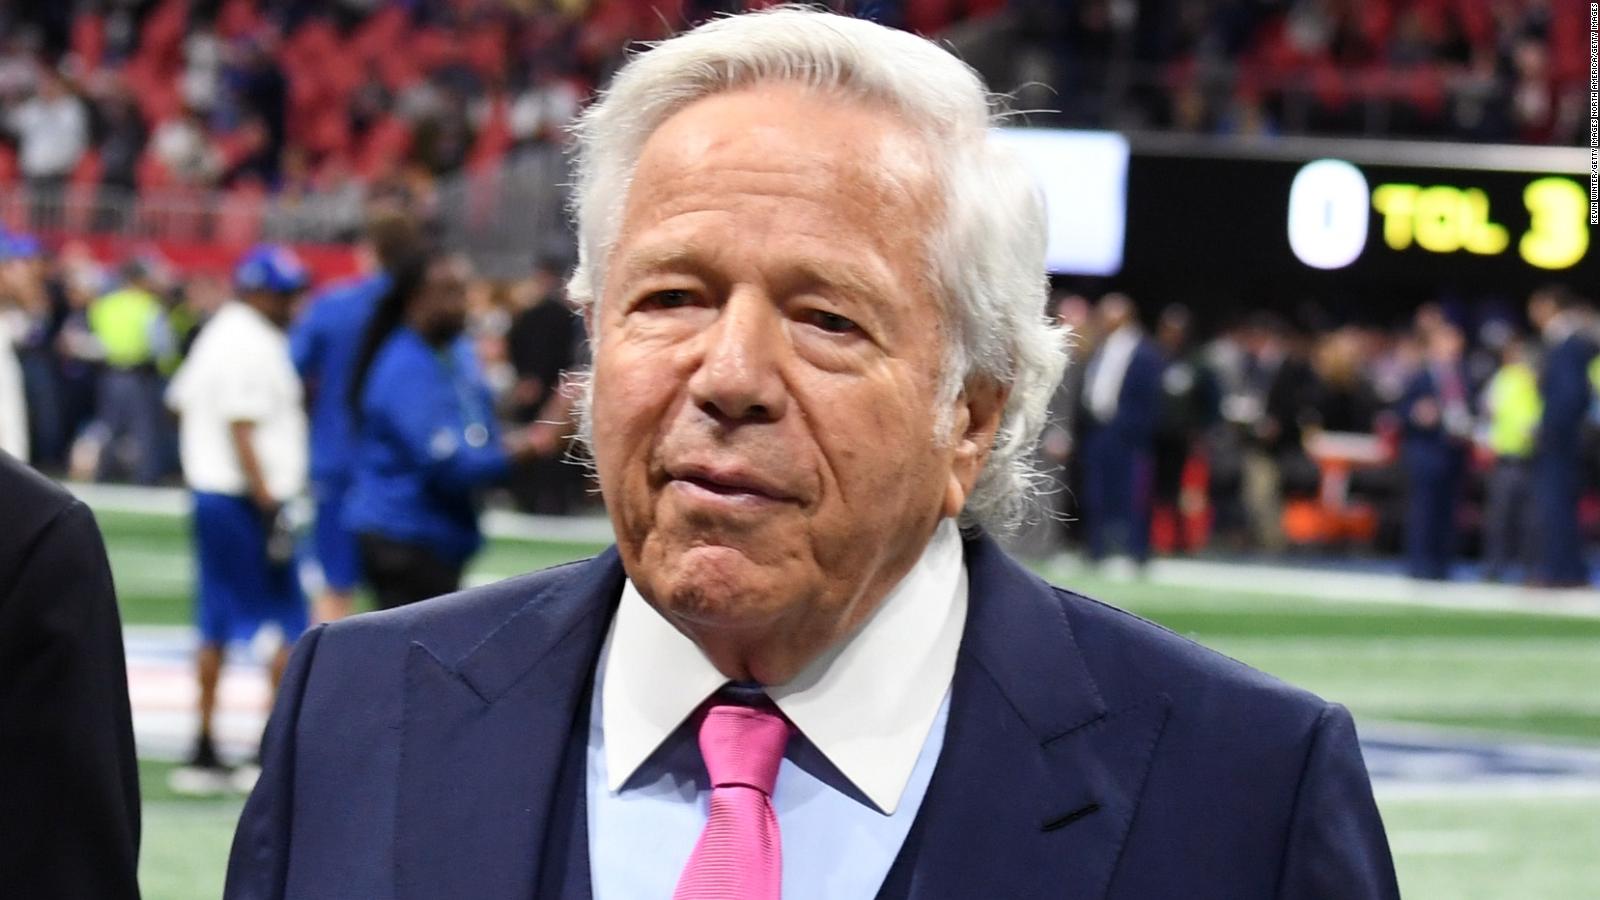 Patriots Owner Showed Florida Cop Super Bowl Ring When Stopped After He 